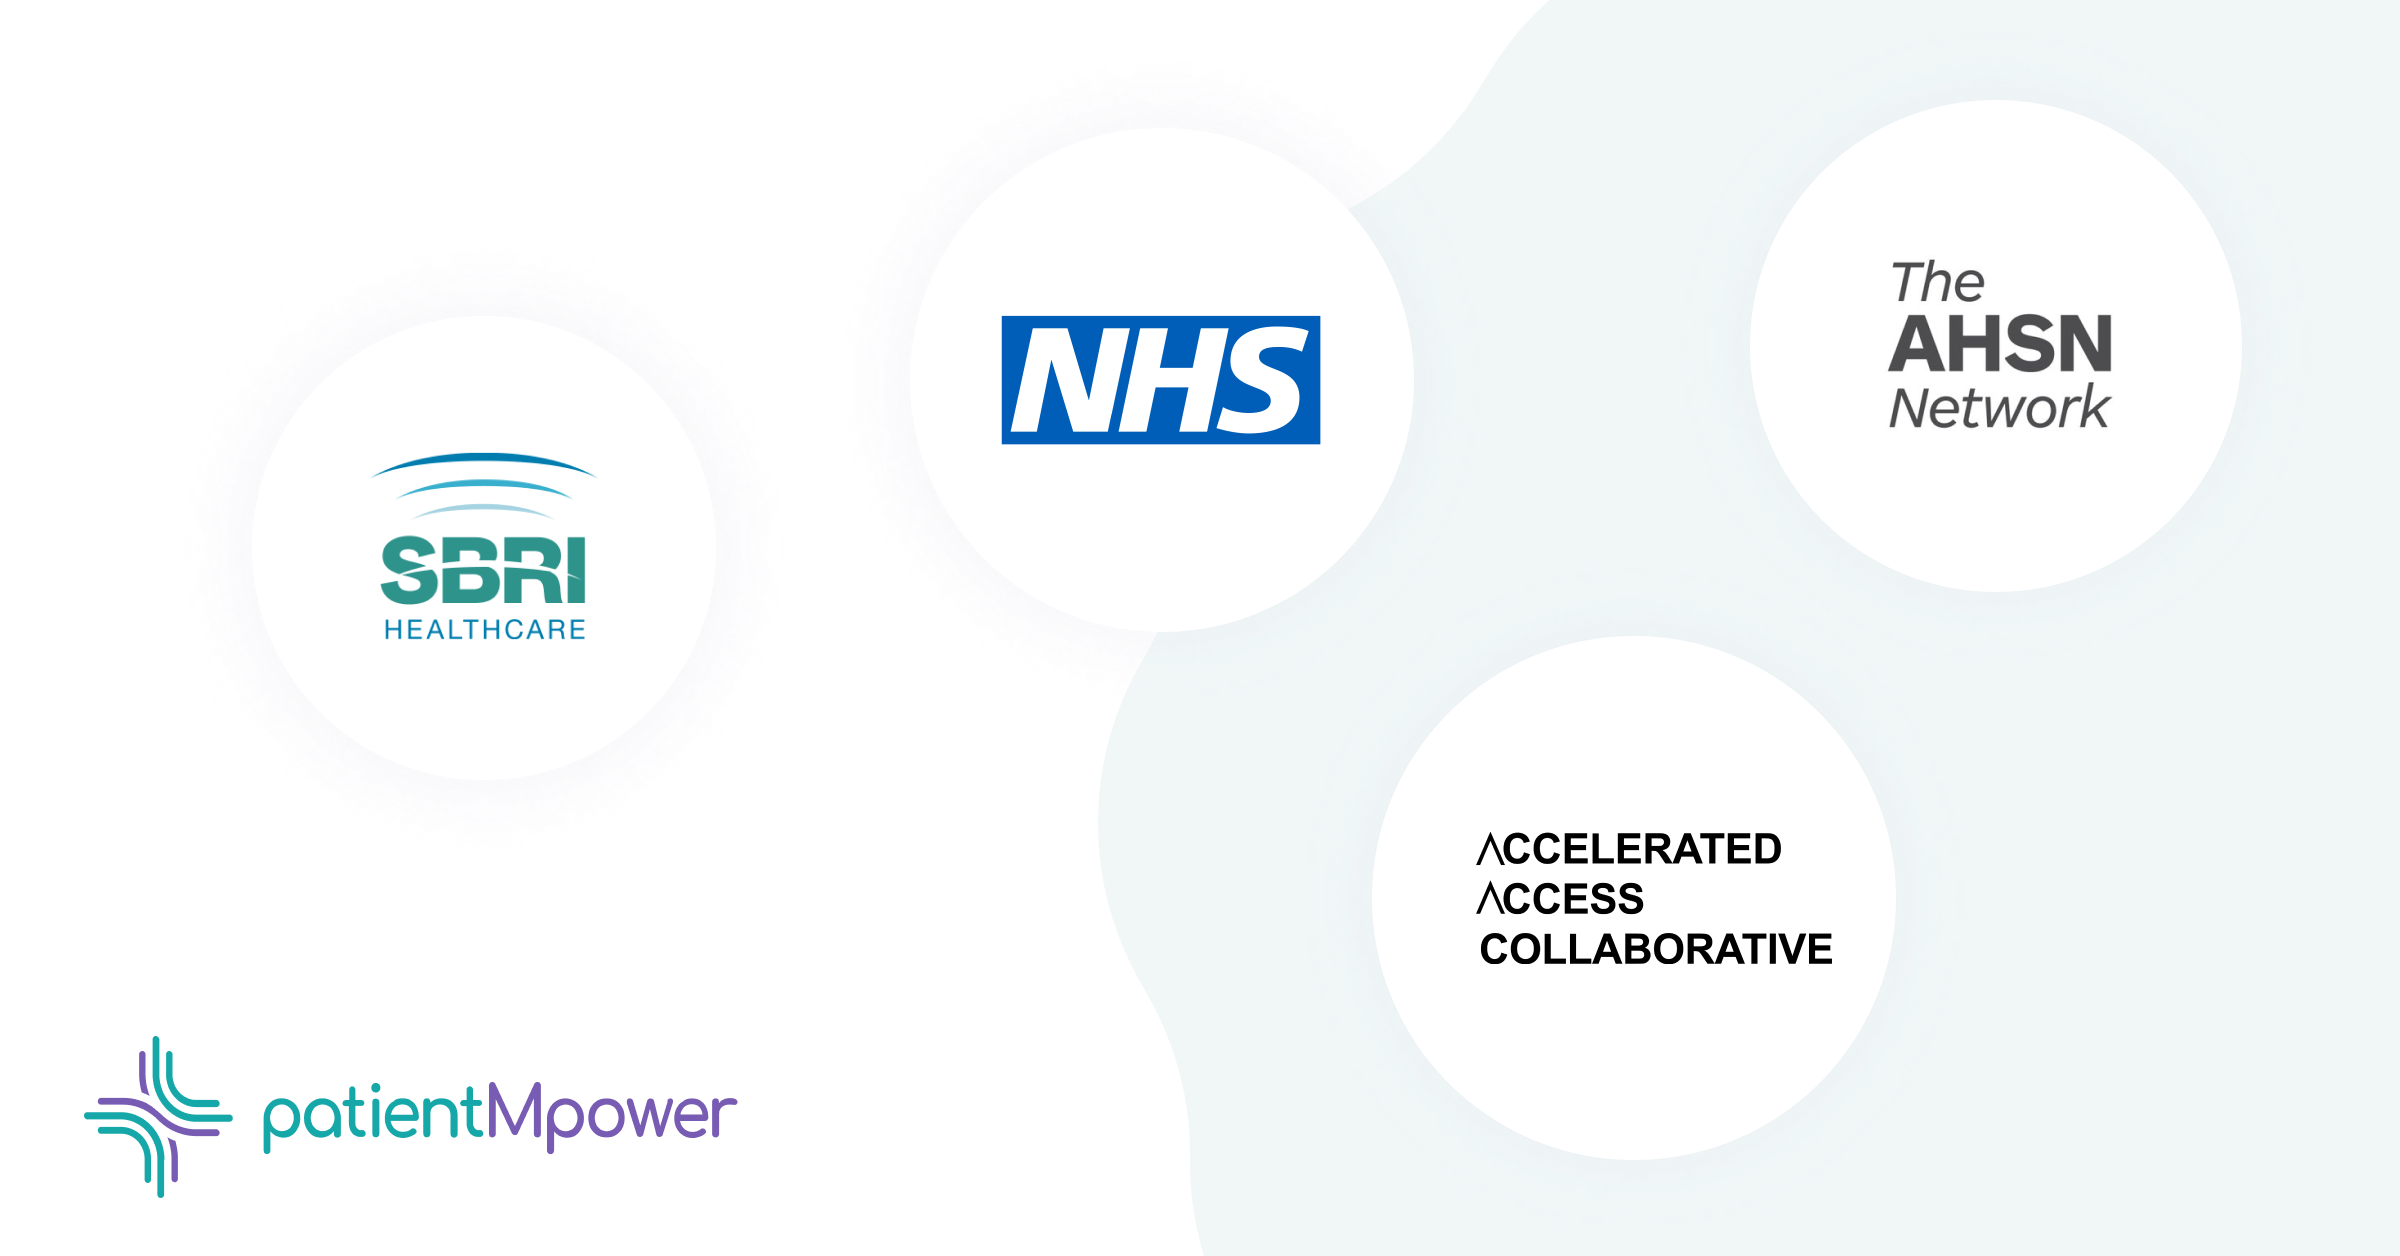 patientMpower awarded SBRI Healthcare funding for respiratory care research